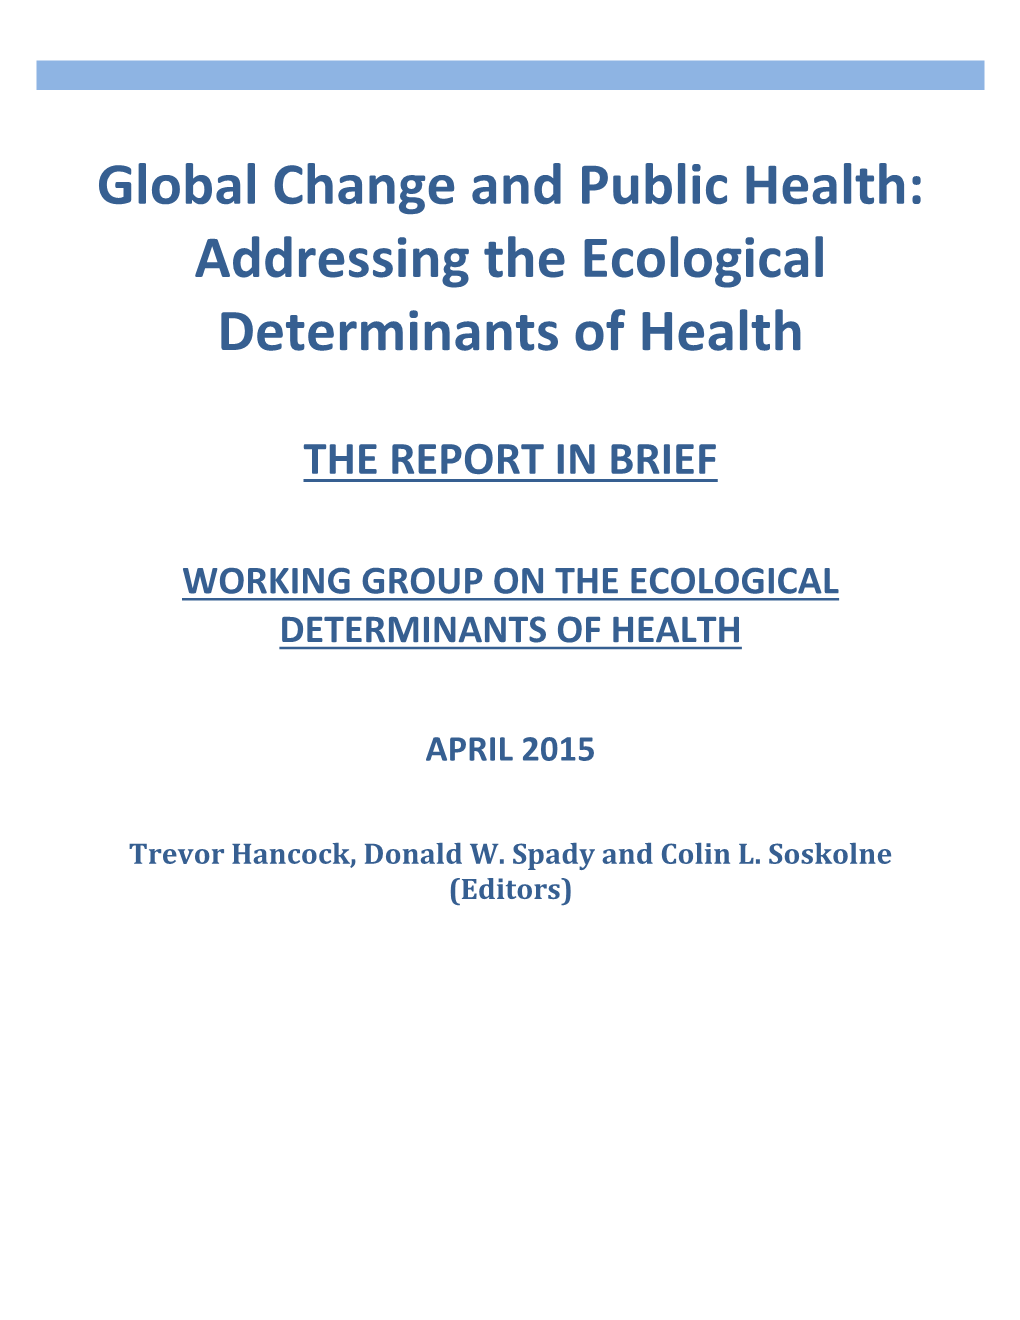 Addressing the Ecological Determinants of Health